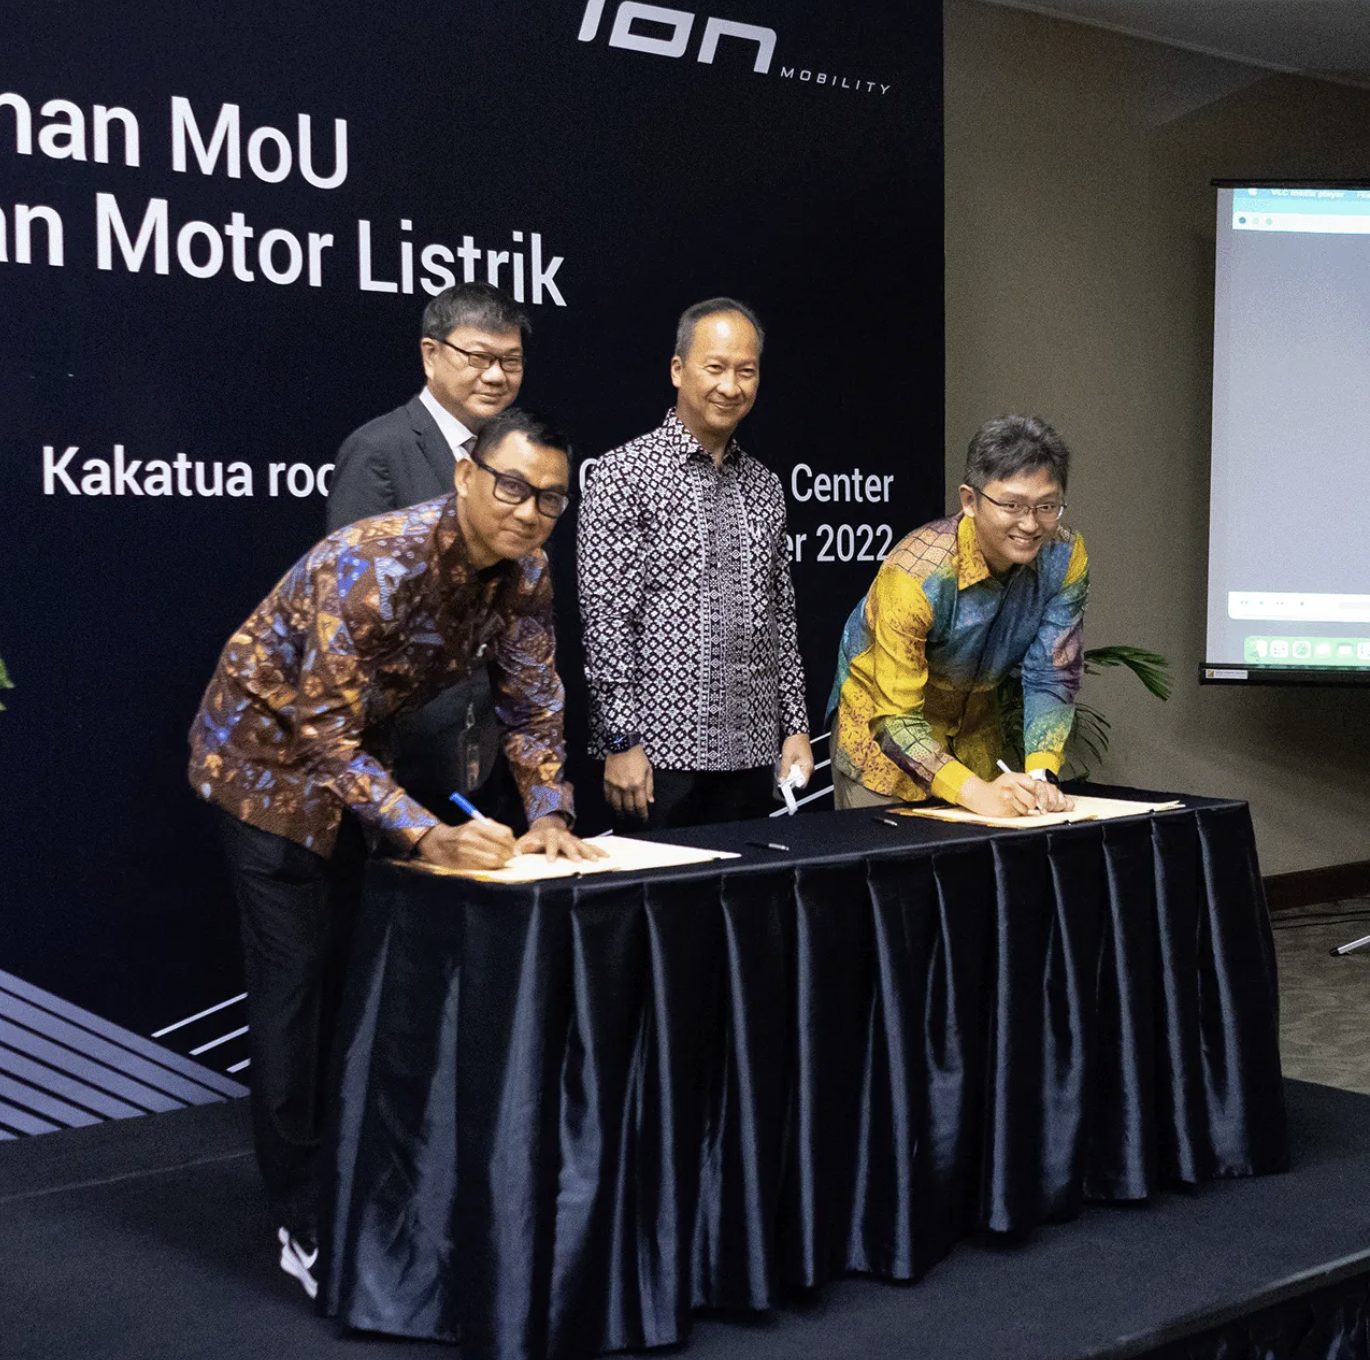 Daily Markup #641: ION Mobility signs MoU with PLN to bring affordable fast charging solutions to electric motorcycles in Indonesia